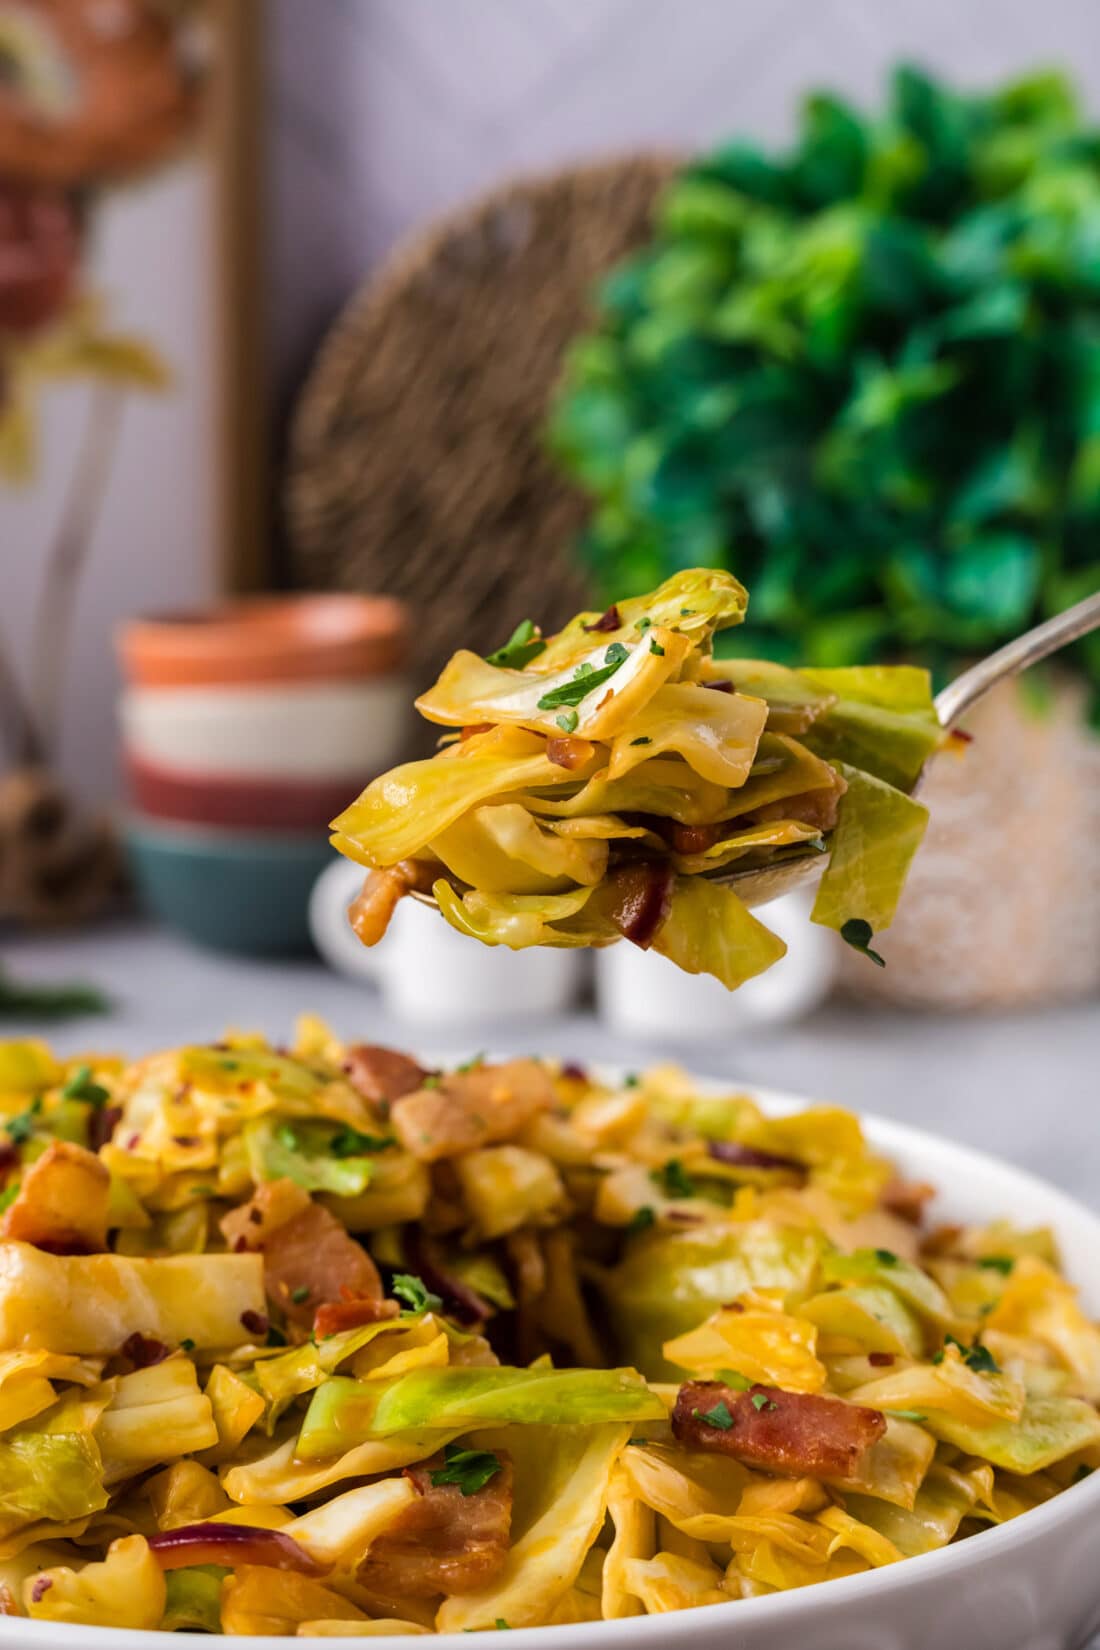 Spoonful of Spicy Fried Cabbage held above a bowl of Spicy Fried Cabbage